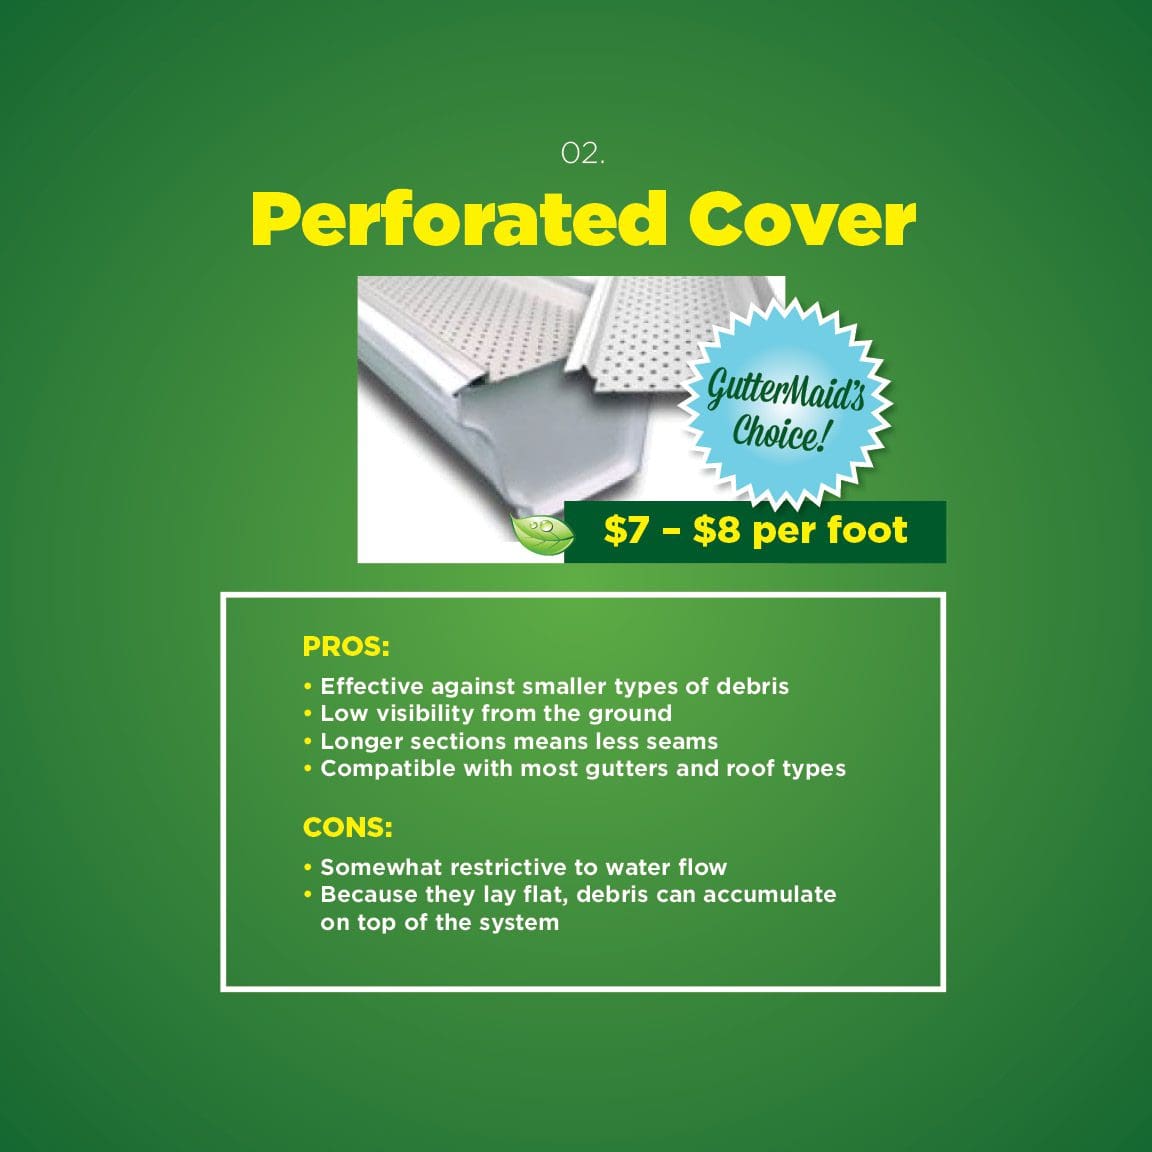 Perforated covers pros and cons